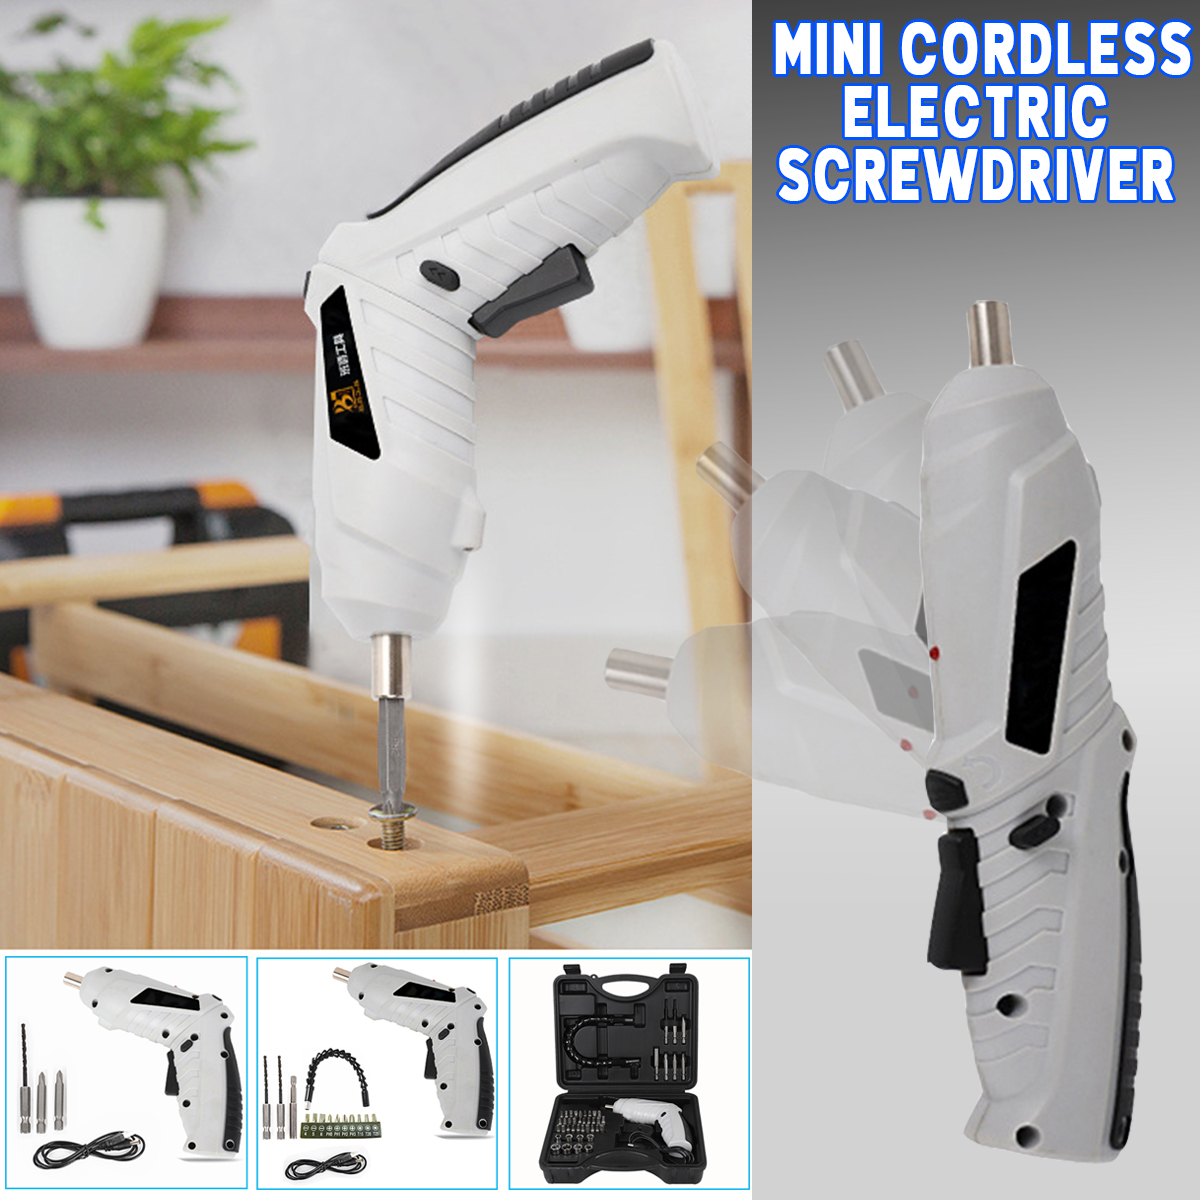 Mini Cordless Electric Screwdriver Set USB Rechargeable Drill Driver With Work Light 10